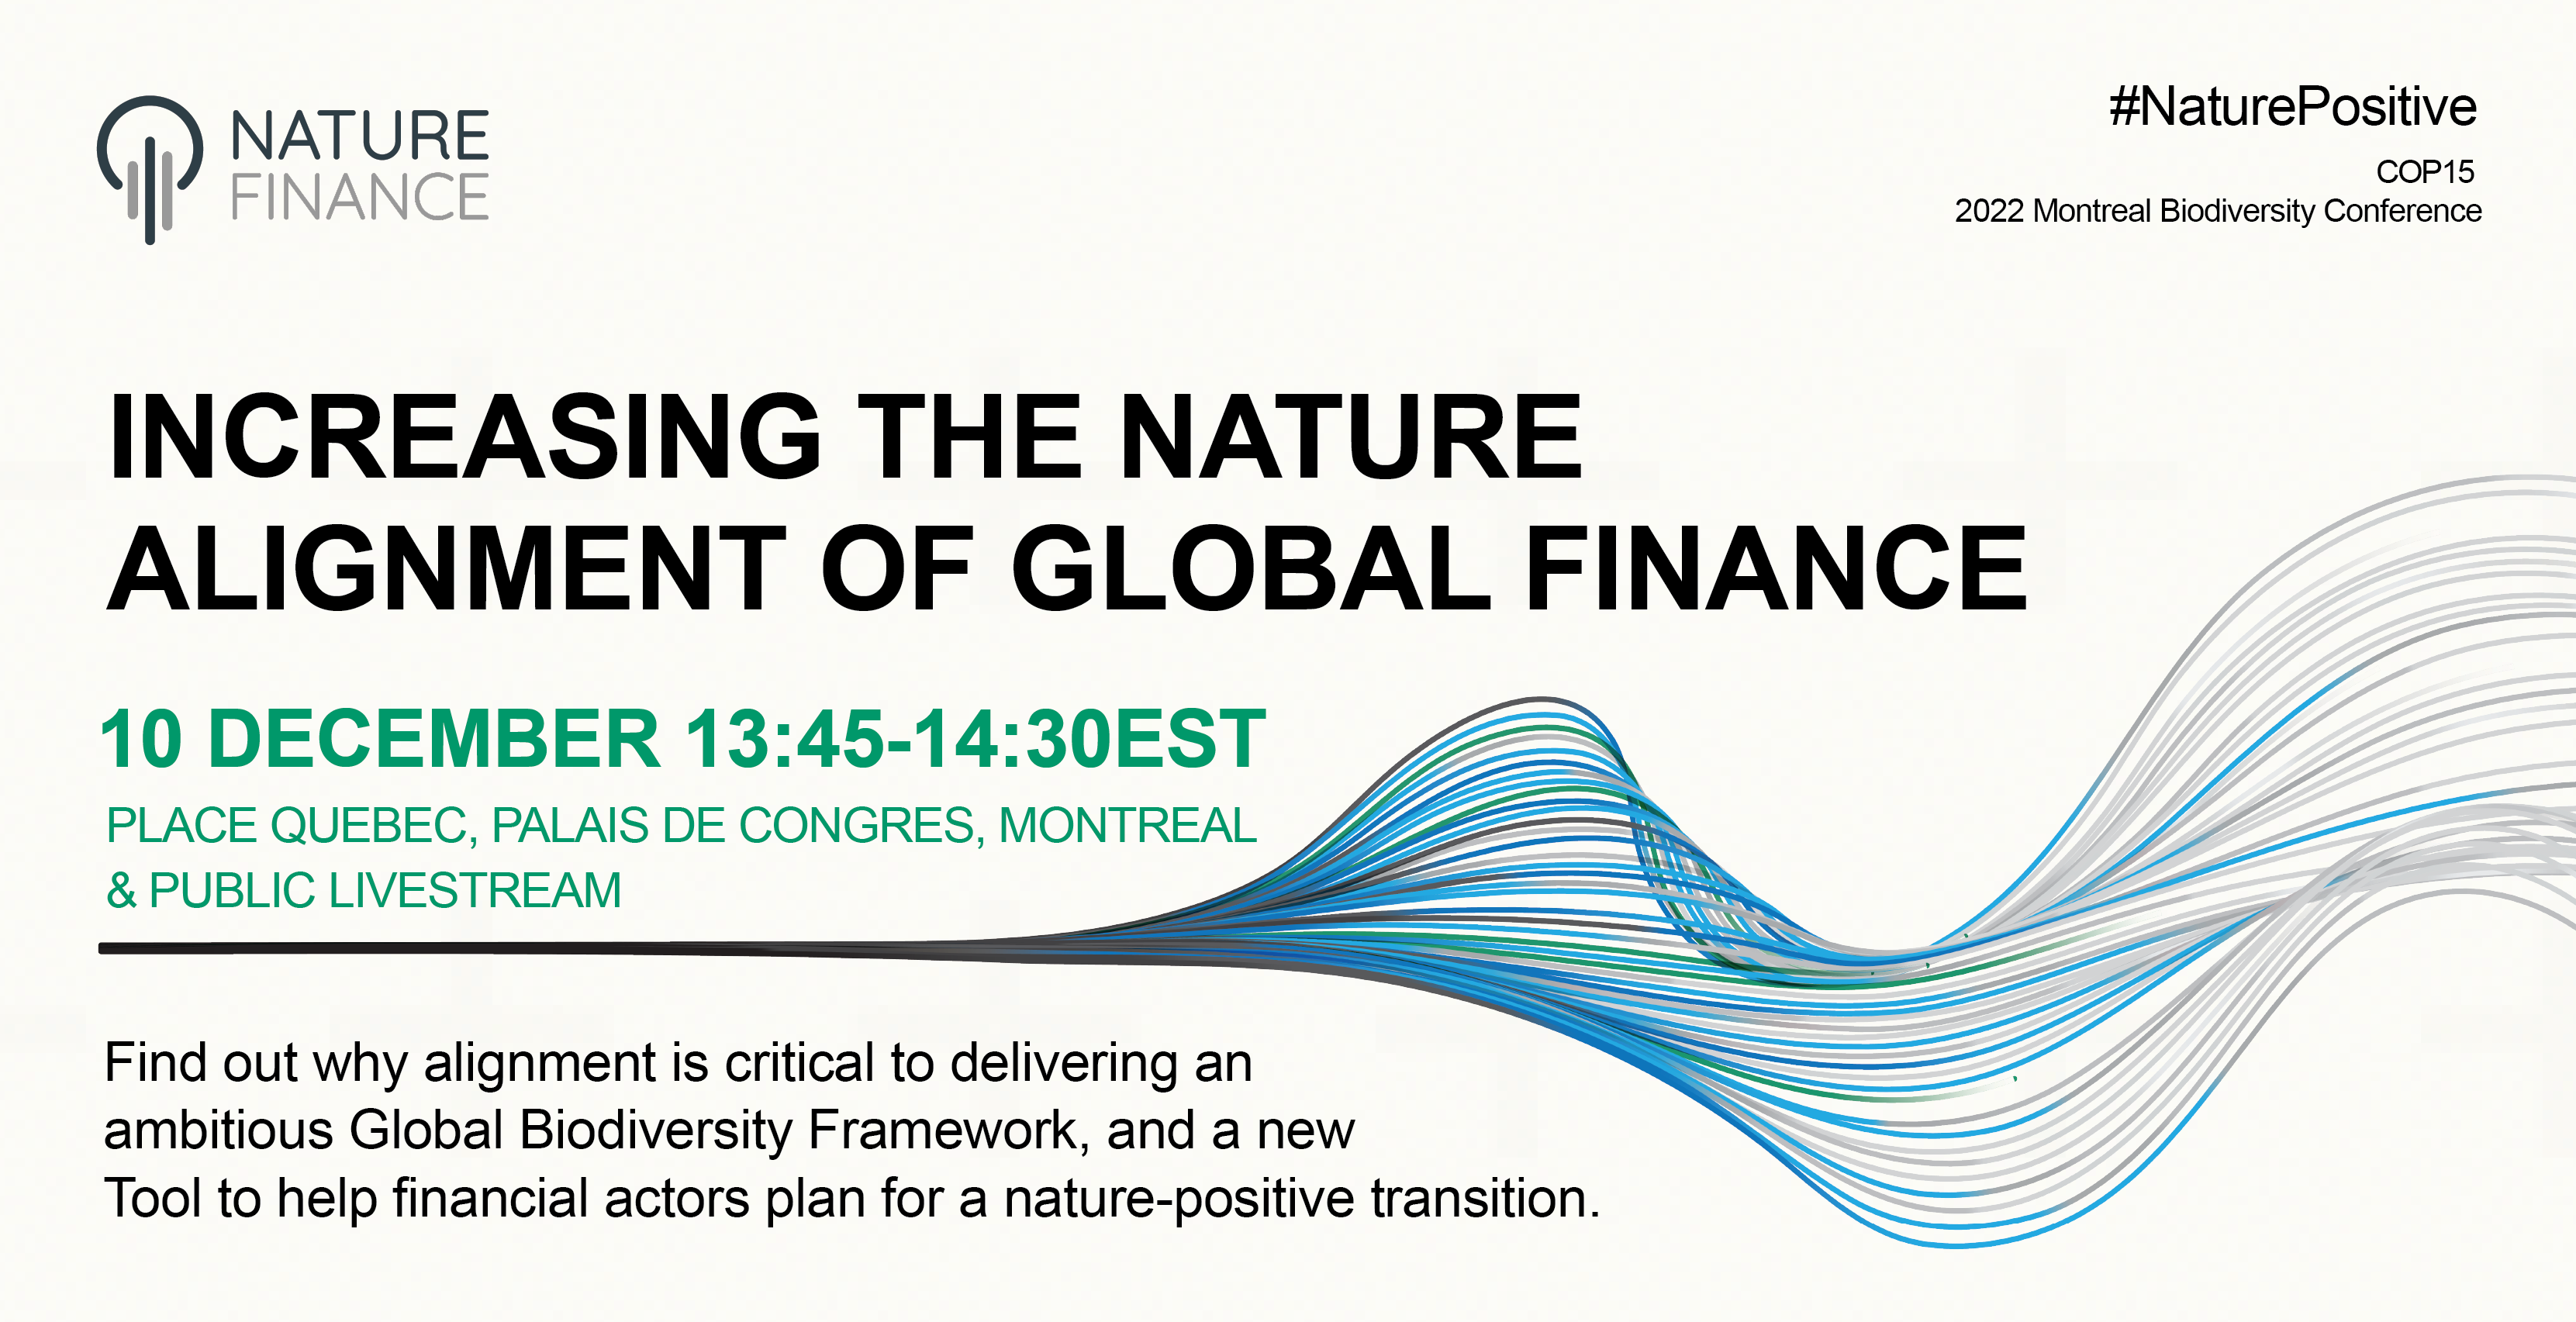 EVENTS: NatureFinance at COP 15, Increasing Finance-Nature Alignment